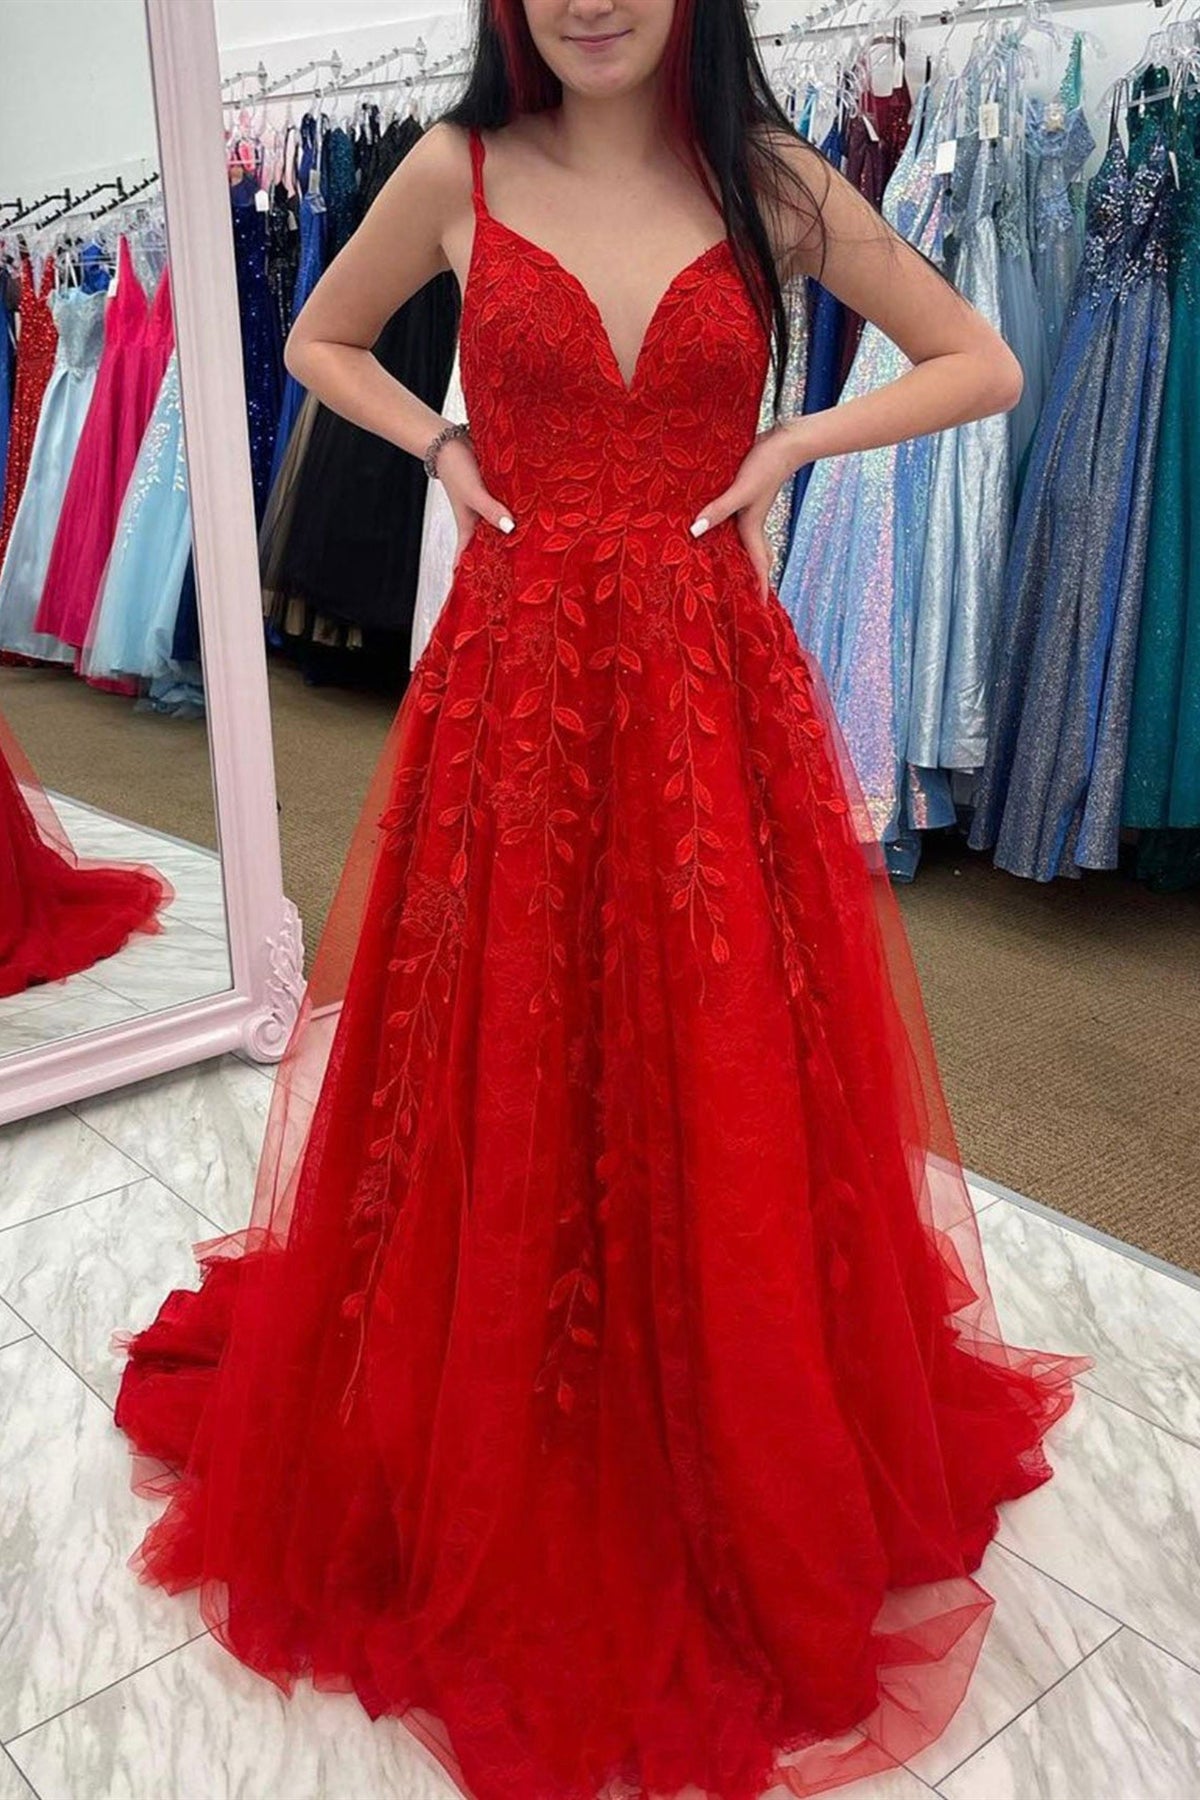 Red Lace Prom Dresses Long, Prom Dress, Dance Dresses, Graduation School Party Gown